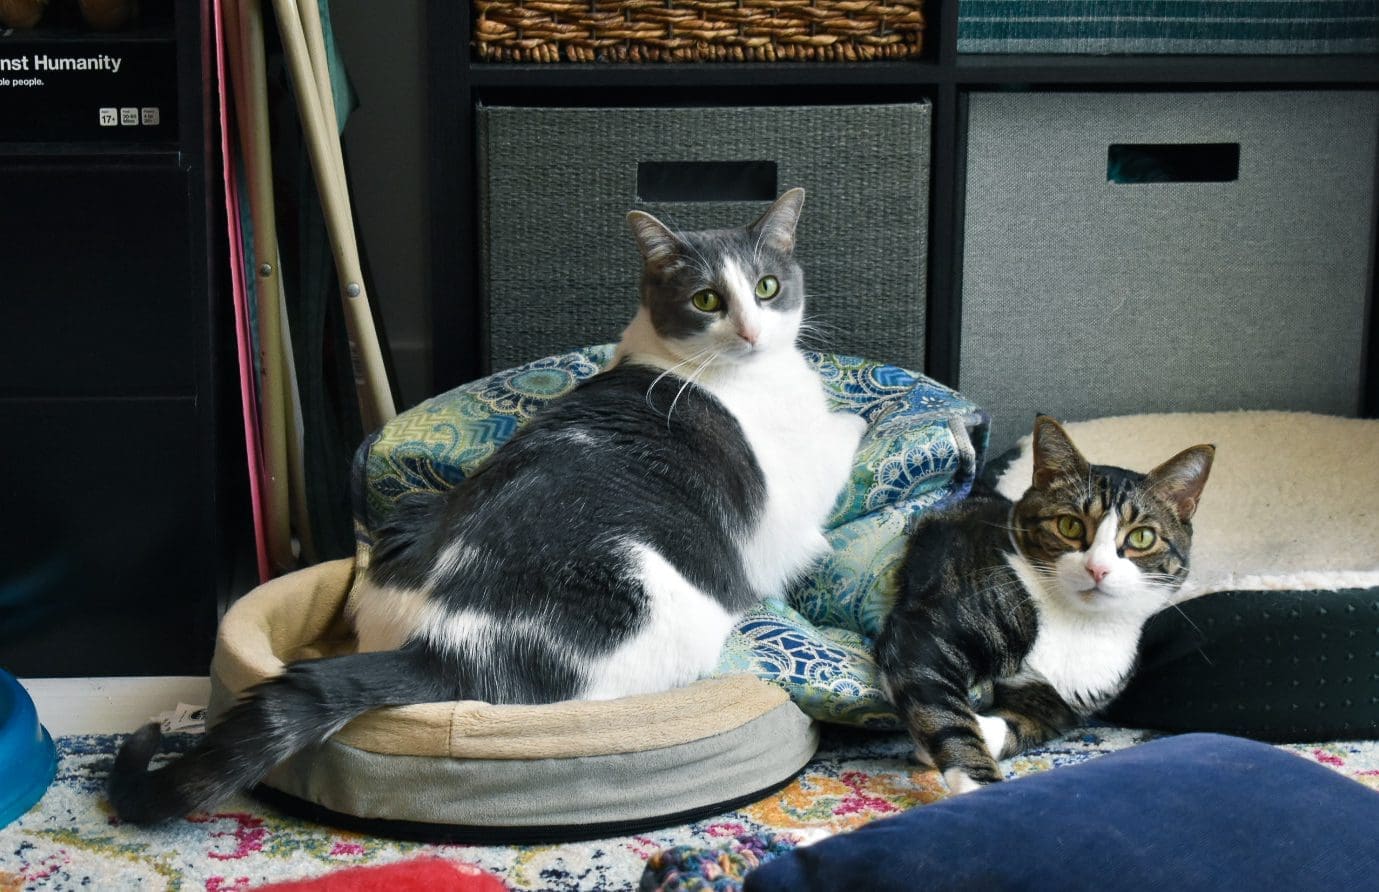 cat beds that cats actually use - Louis and Emory, tabby cats, with the Cat Ball, their favorite heated bed, and the memory foam bed